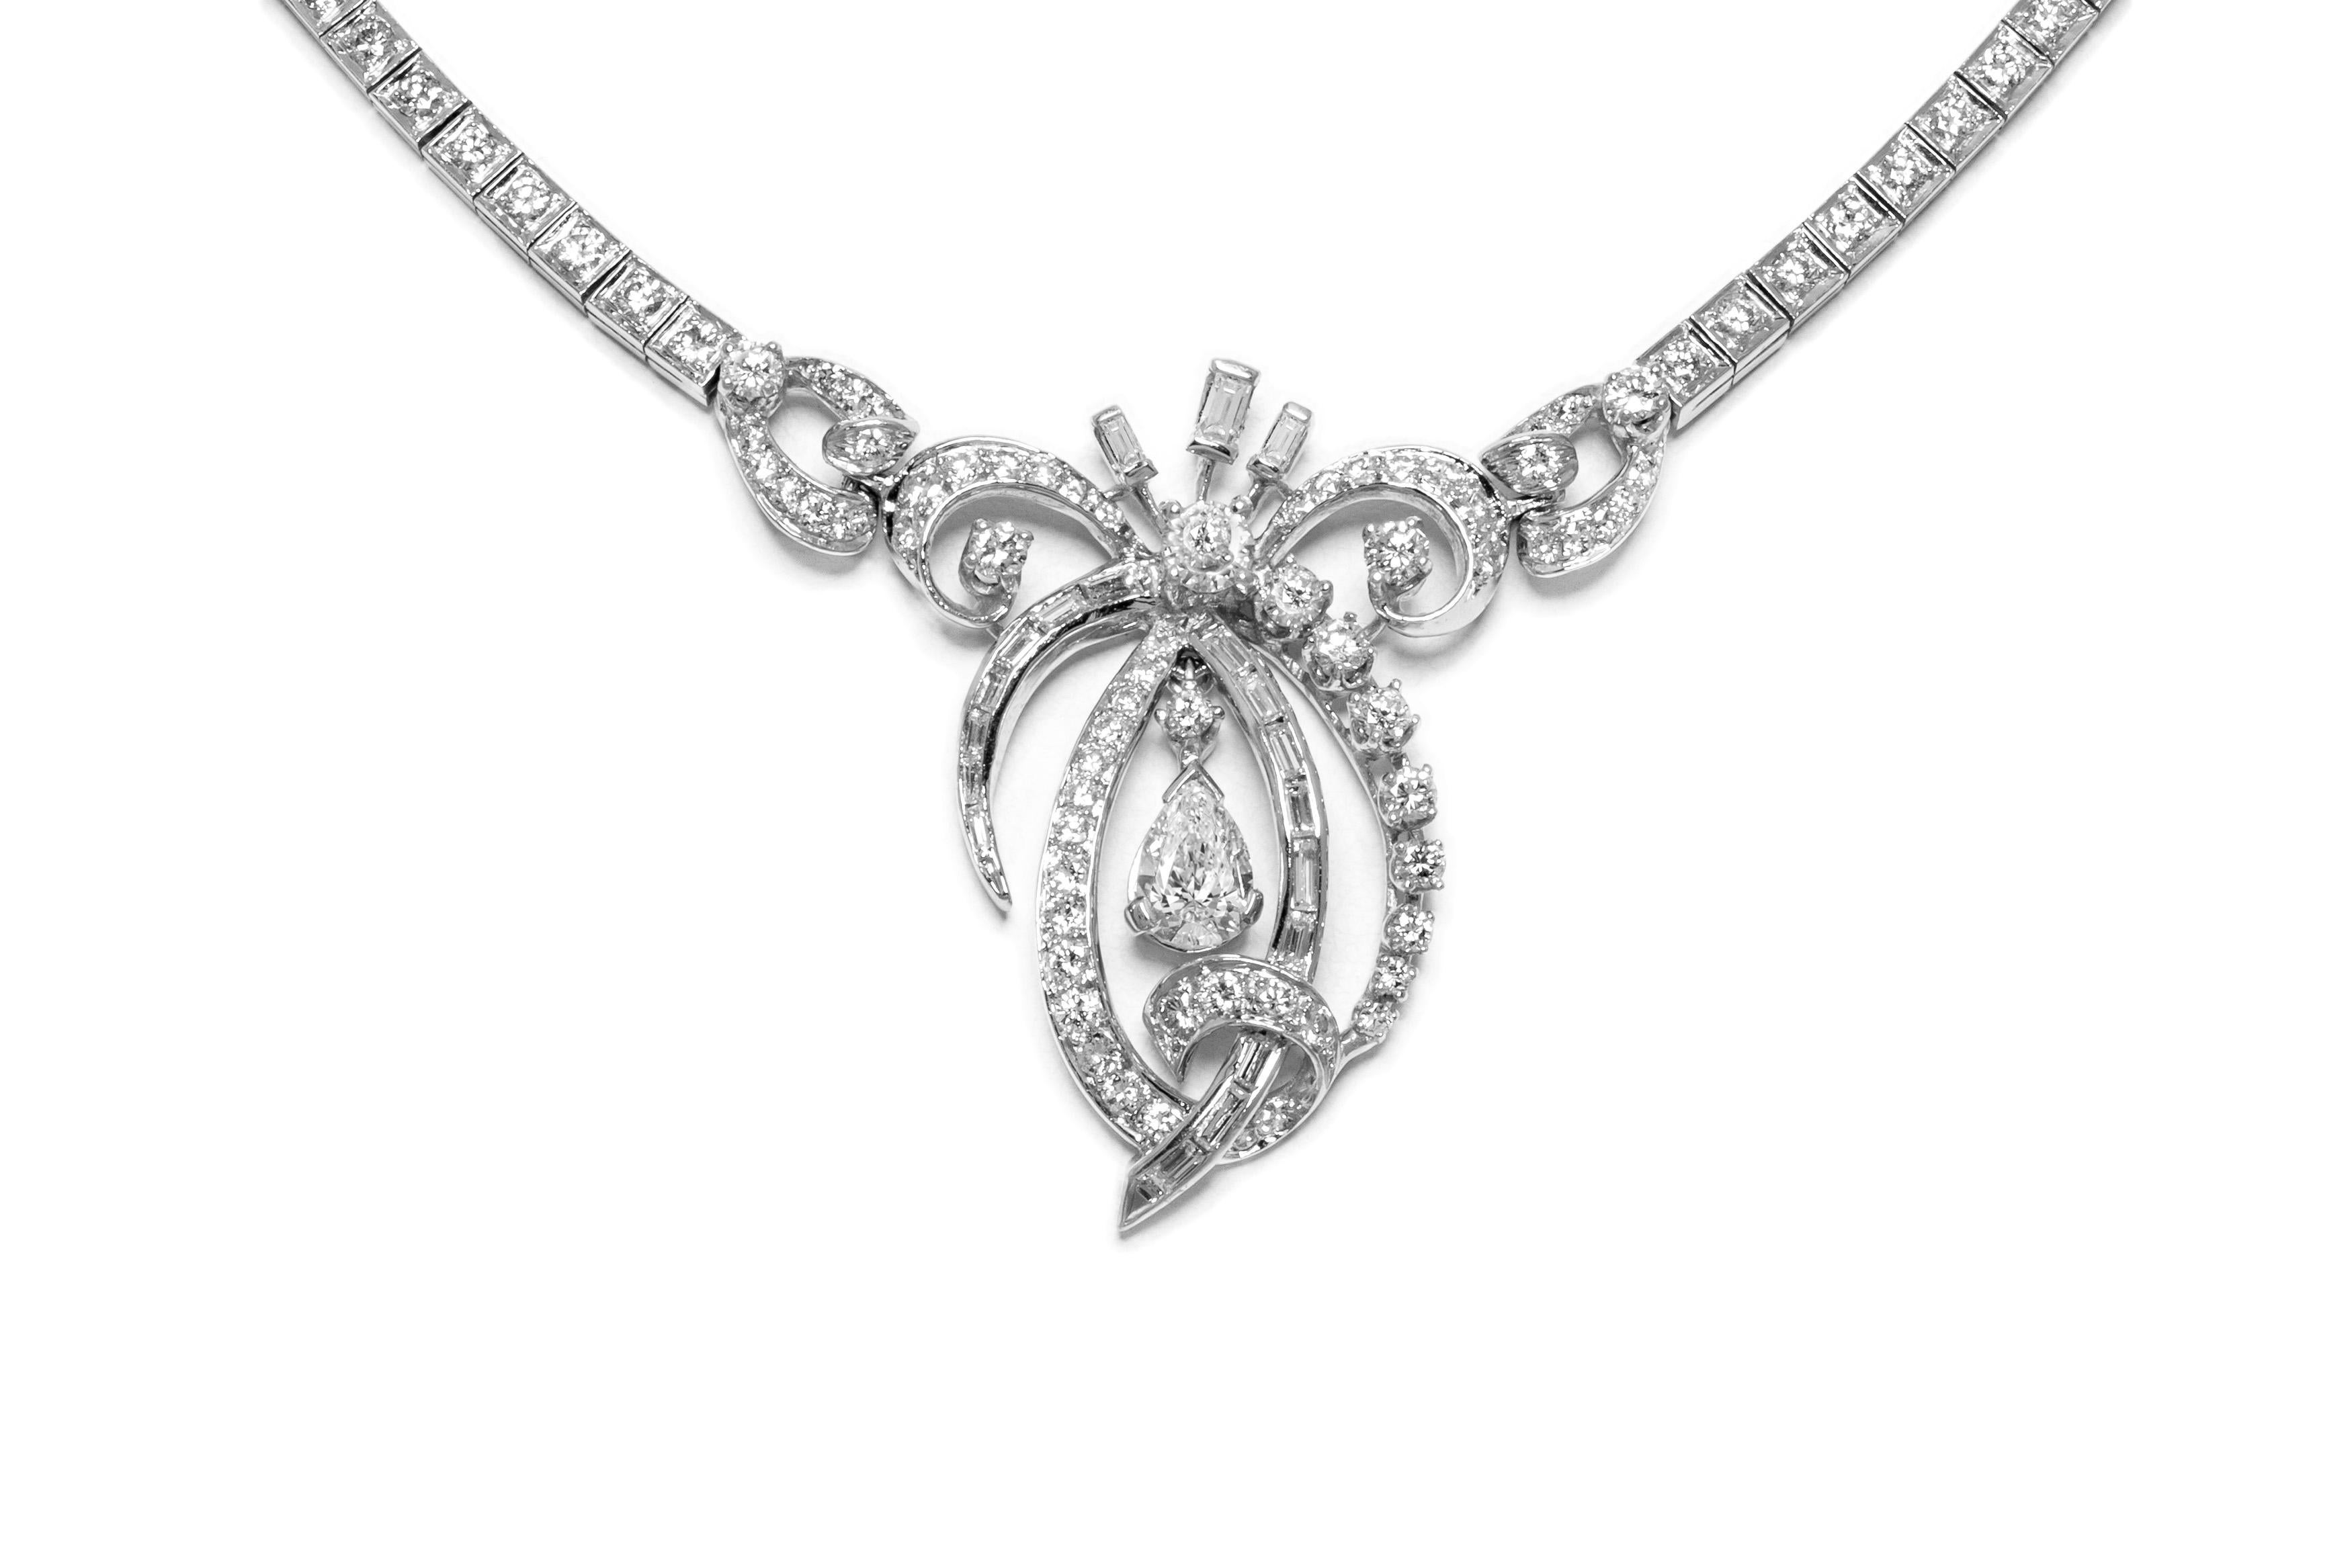 Necklace, finely crafted in platinum with a diamond pendant weighing approximately a total of 11.00 carat. The length of open necklace is 17 inch. Circa 1930's.